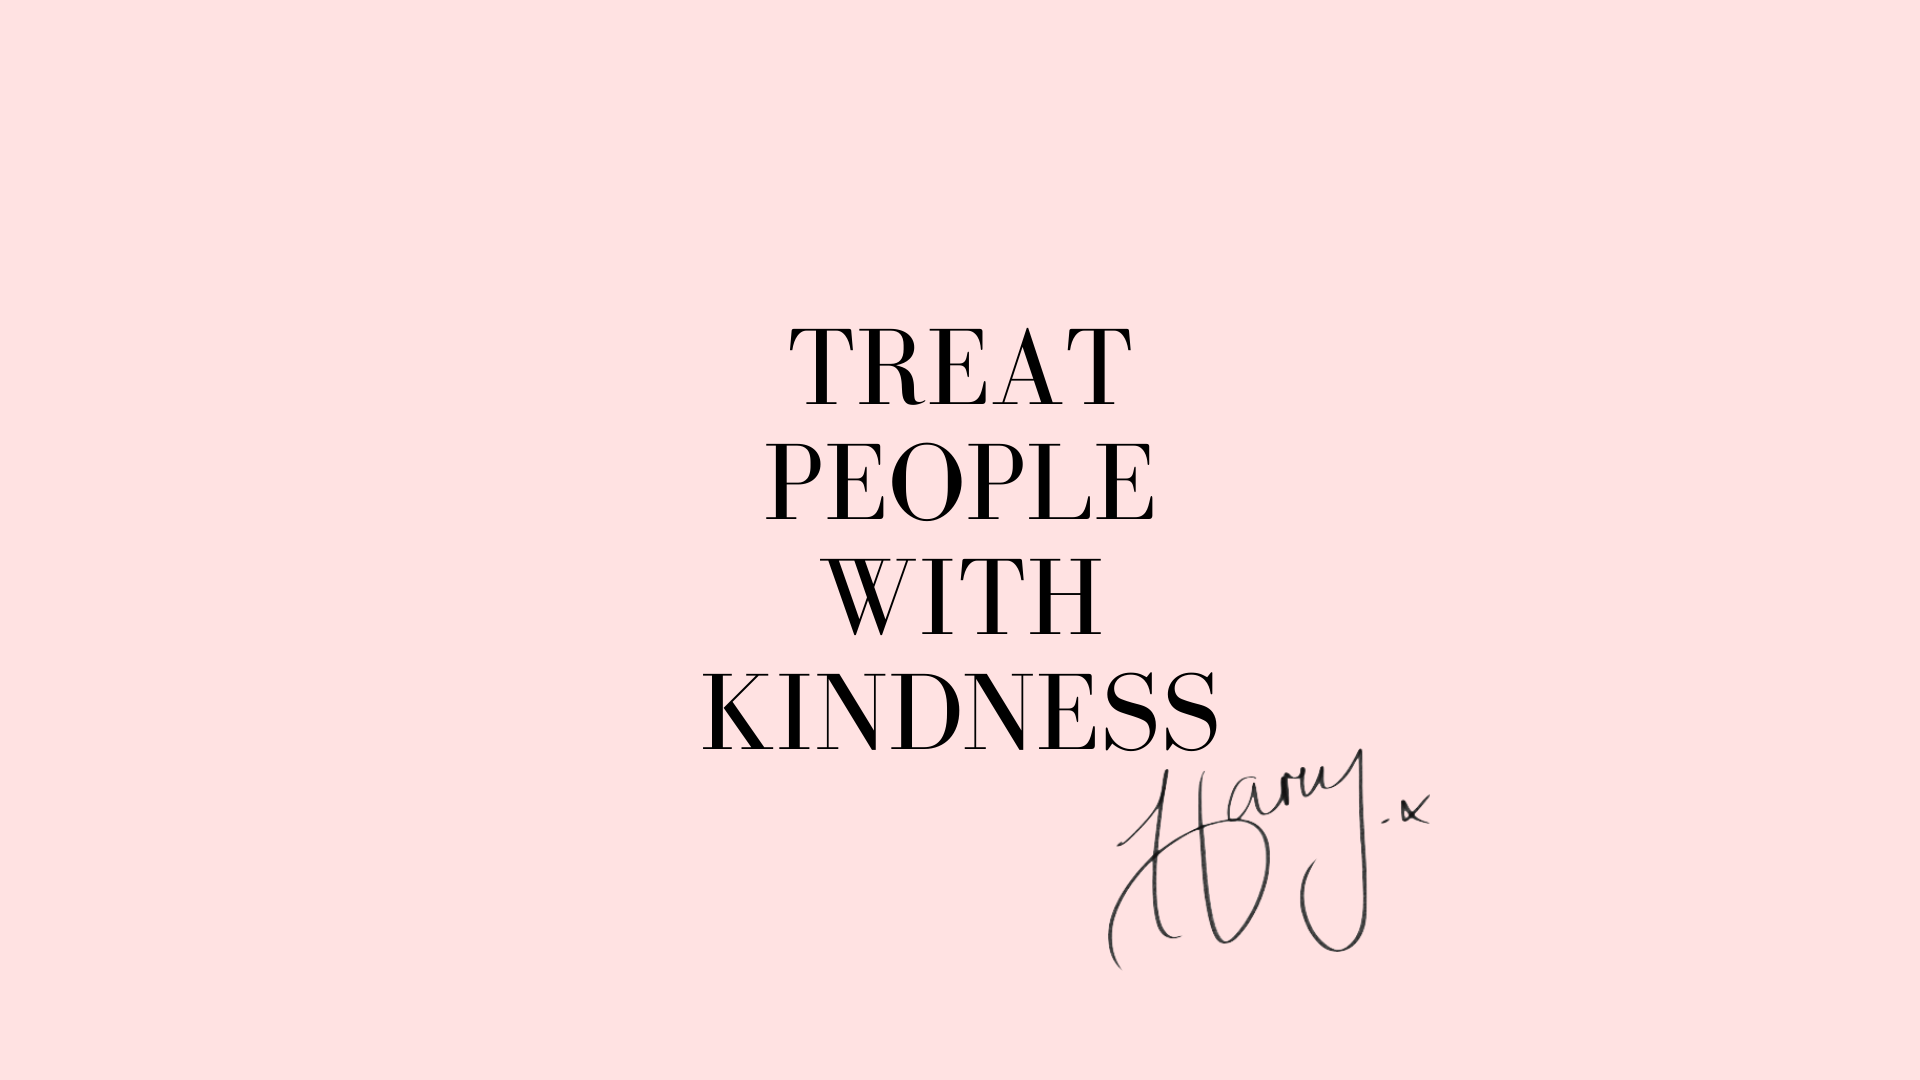 Treat People With Kindness by Harry Styles | Wellesley ...